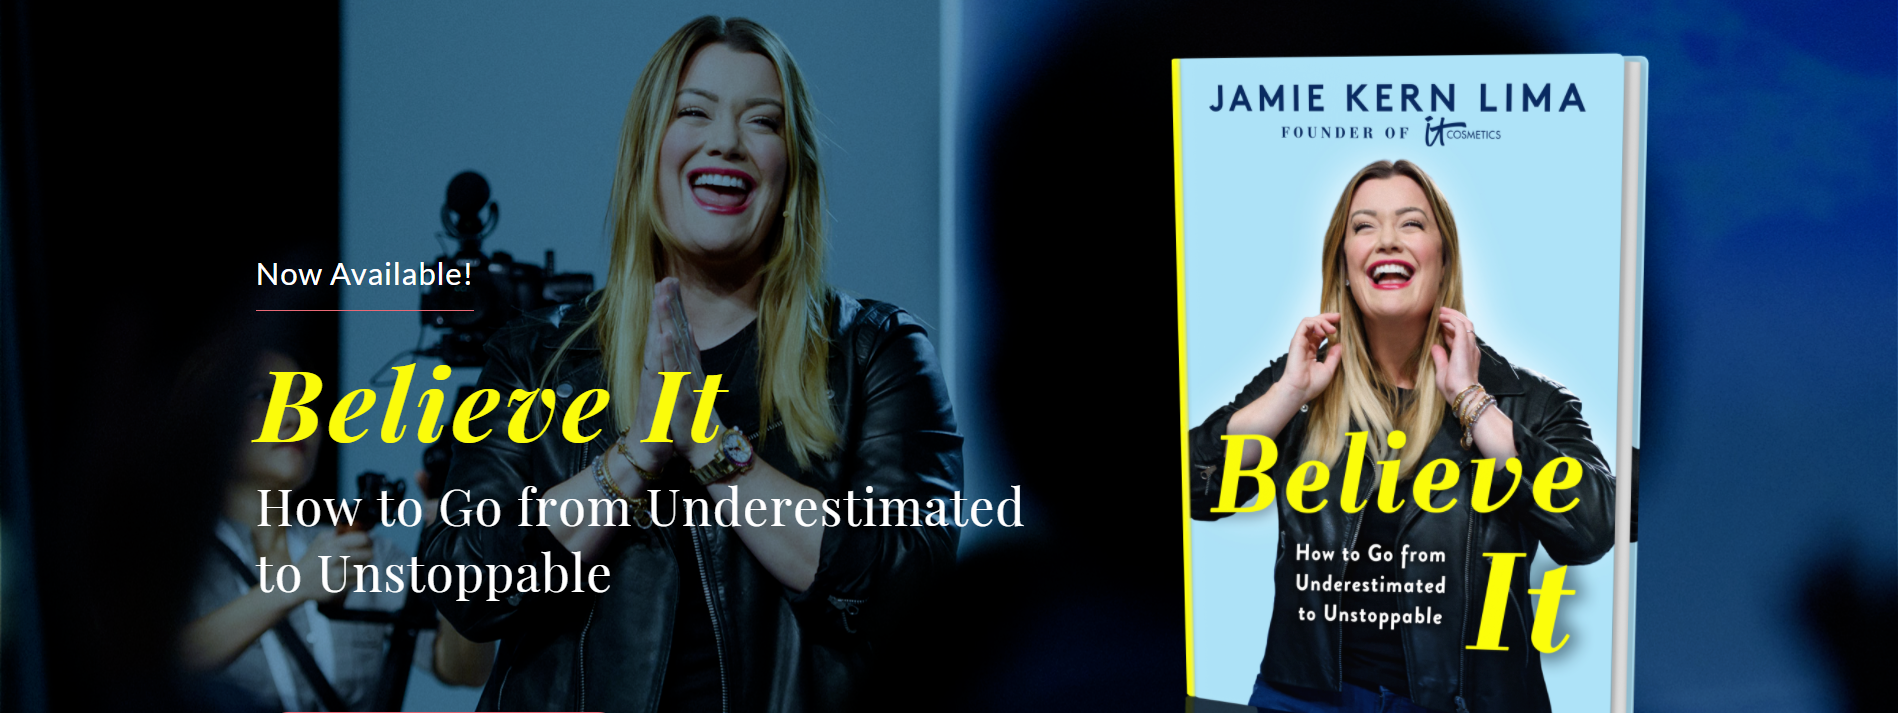 Jamie Kern Lima Book Believe It How to Go from Underestimated to Unstoppable